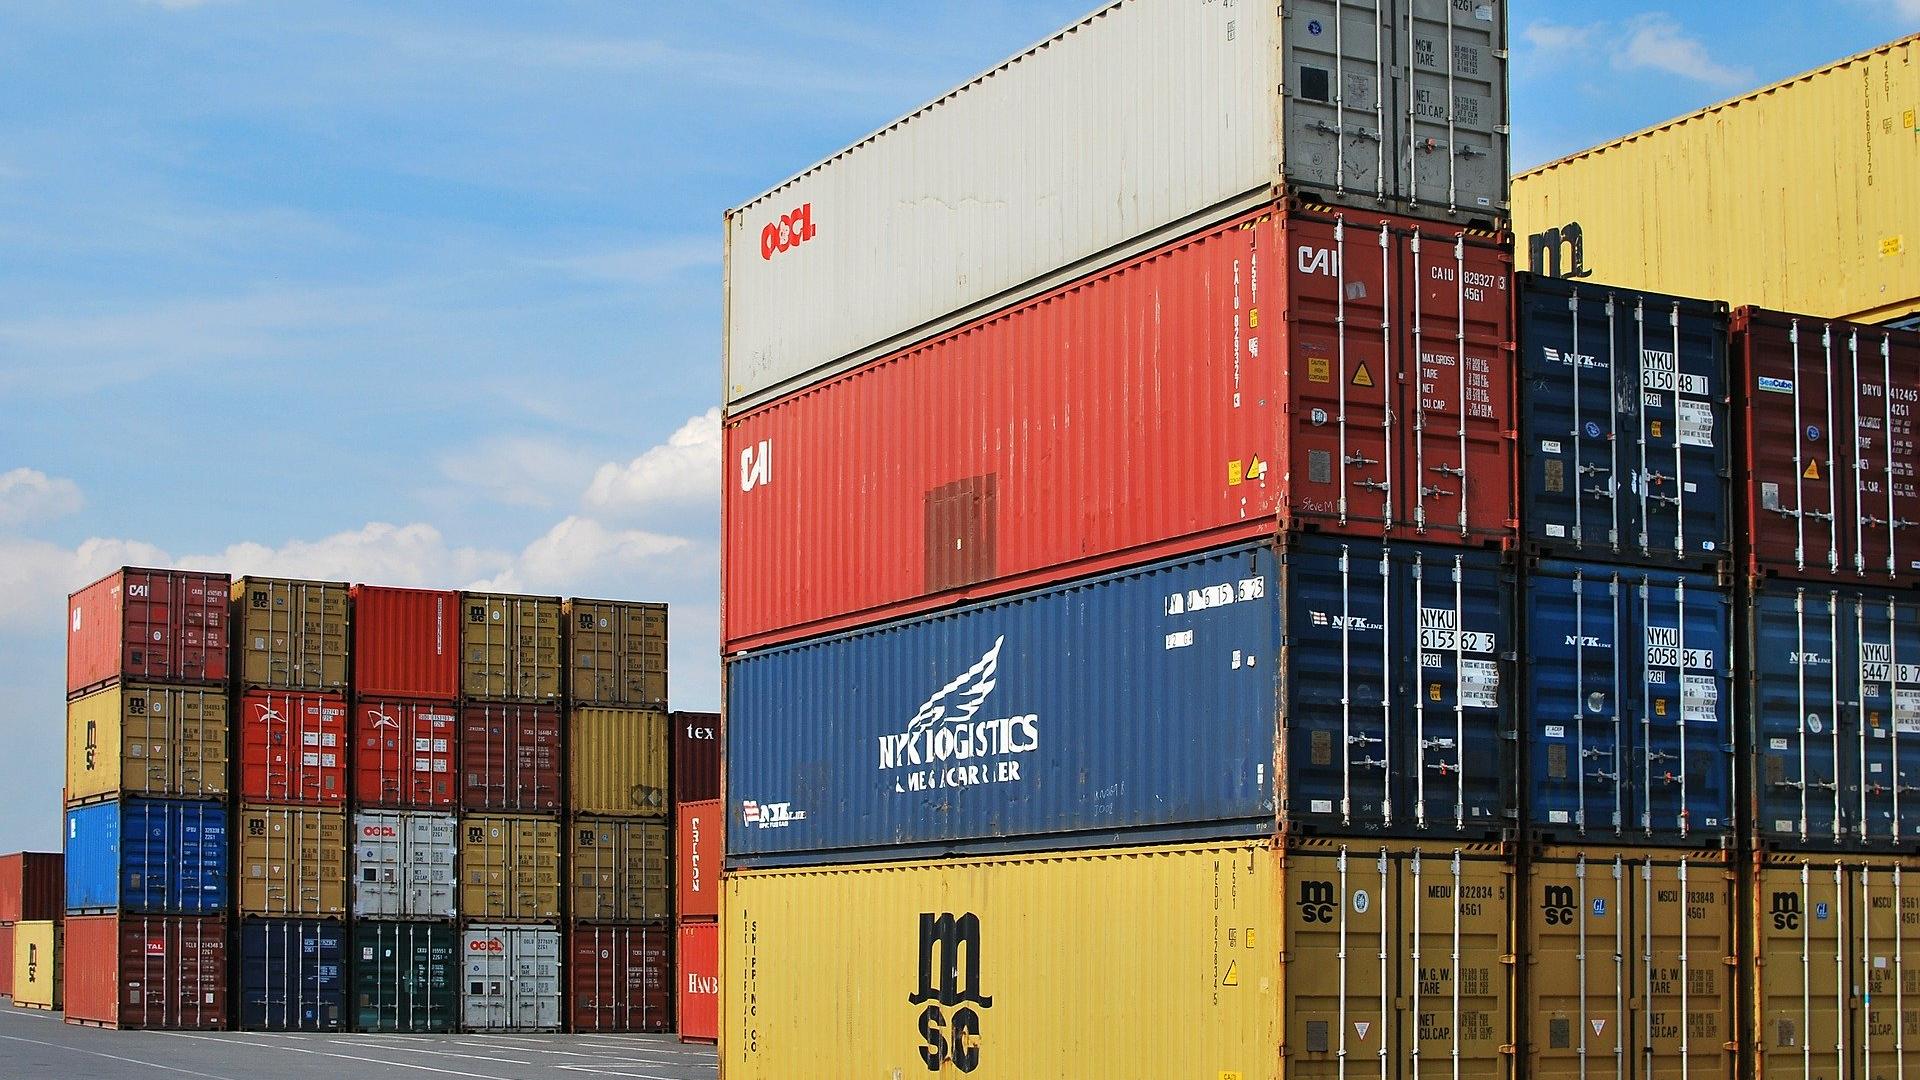 Stack of containers on dock